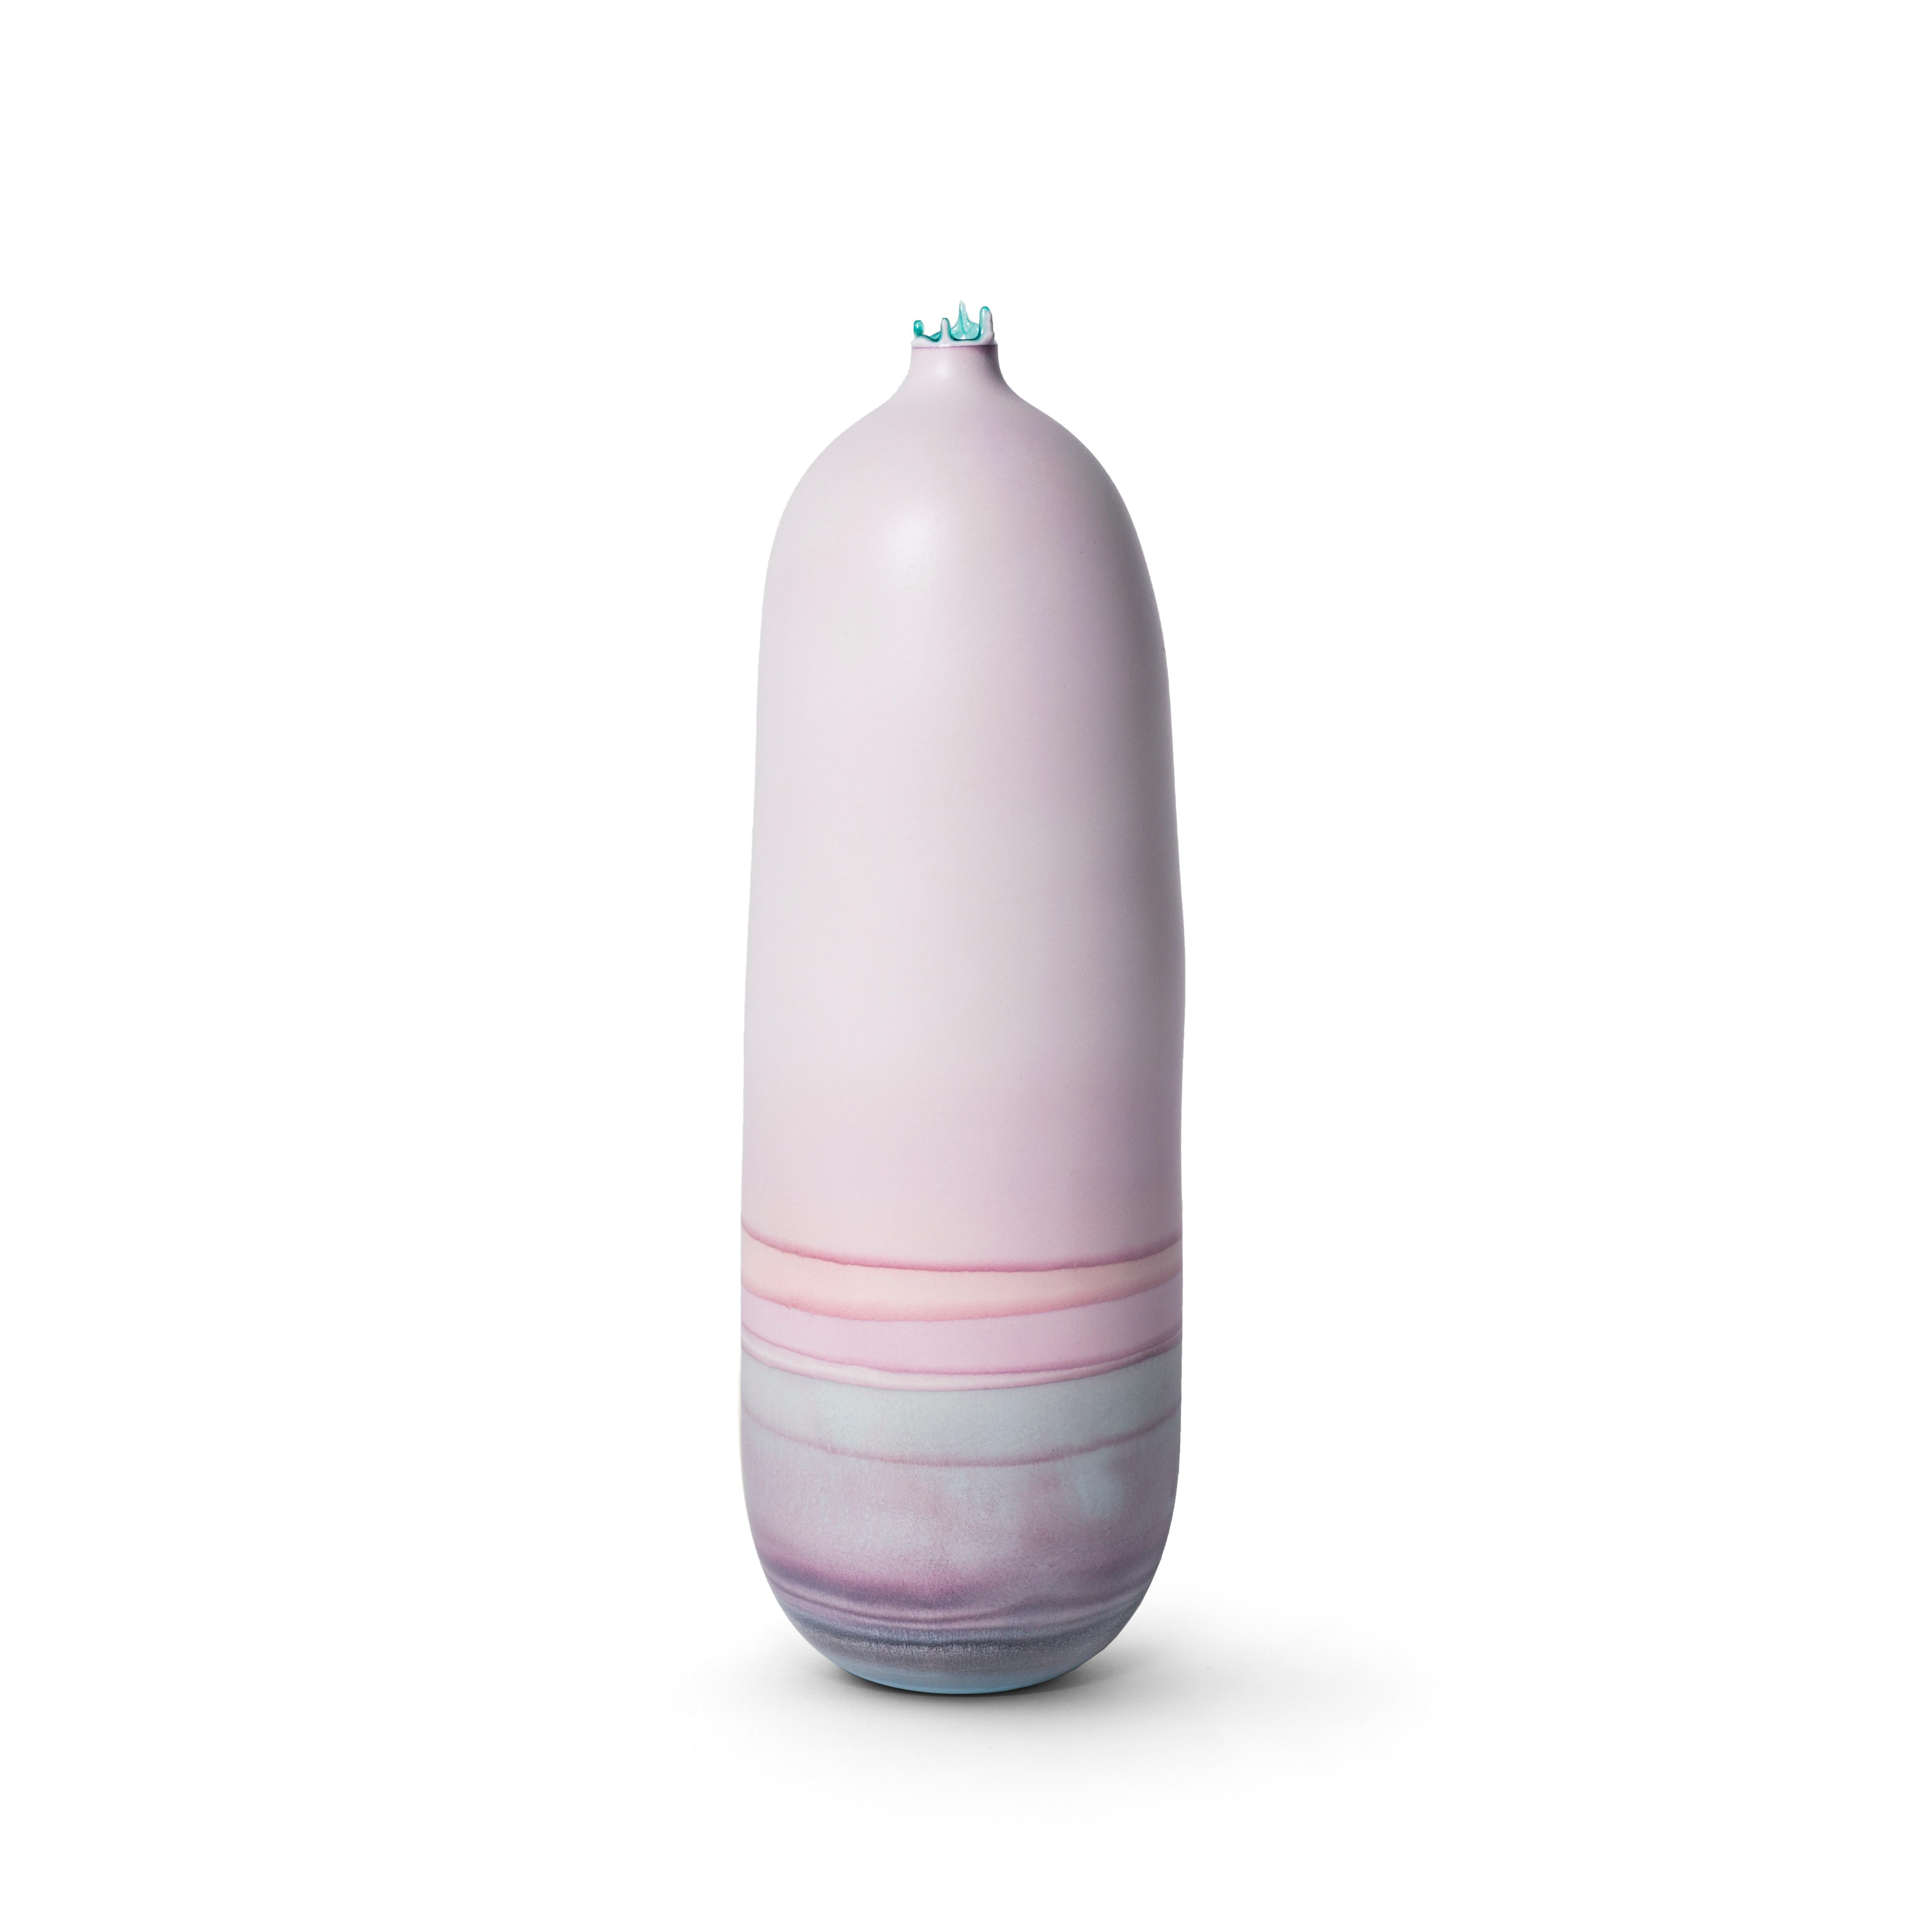 Lilac Ombre Venus vase by Elyse Graham
Dimensions: W 14 x D 14 x H 38 cm.
Materials: plaster, resin.
Molded, dyed, and finished by hand in LA. customization
Available.
All pieces are made to order.

This collection of vessels is inspired by